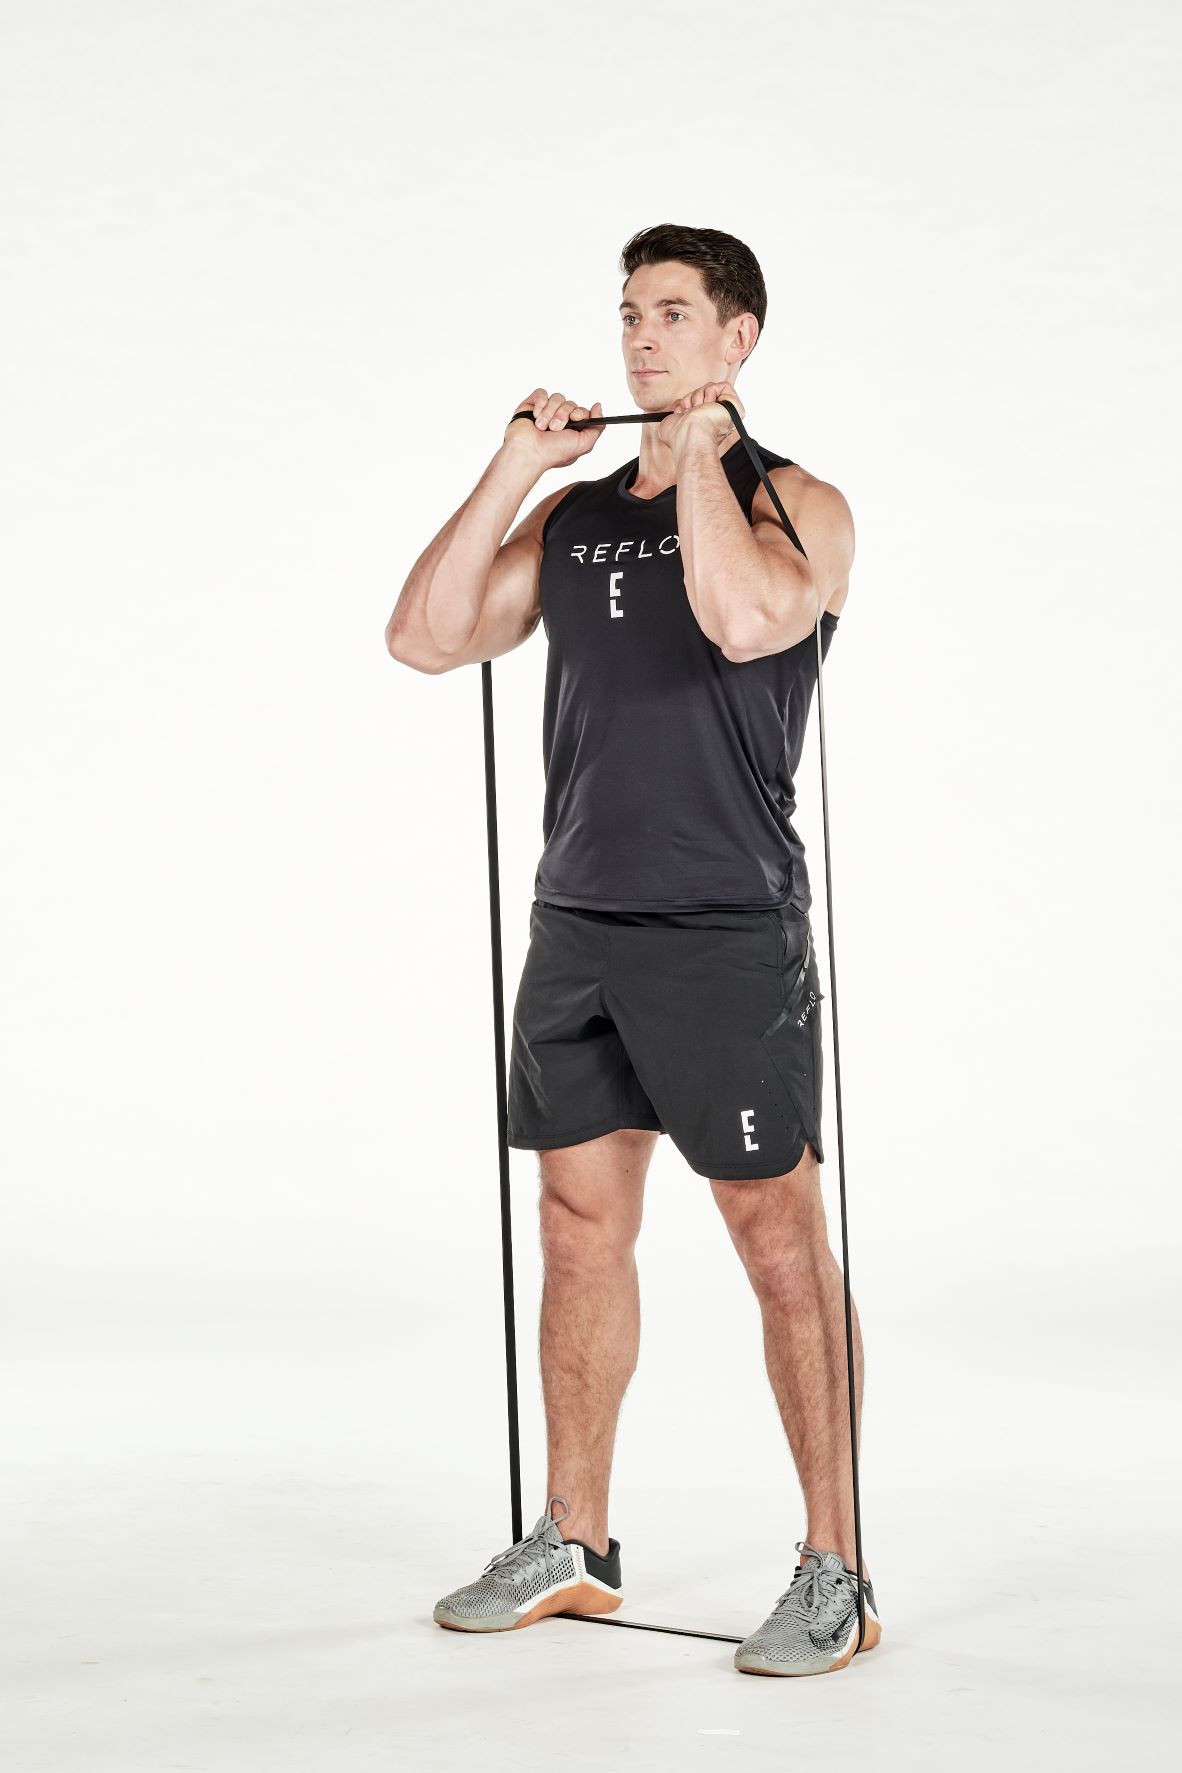 man demonstrating step one of resistance band front squat; standing up straight, he is holding a resistance band that is wrapped under both feet in two hands, holding it level with his shoulders; he wears a black fitness vest, black shorts and trainers